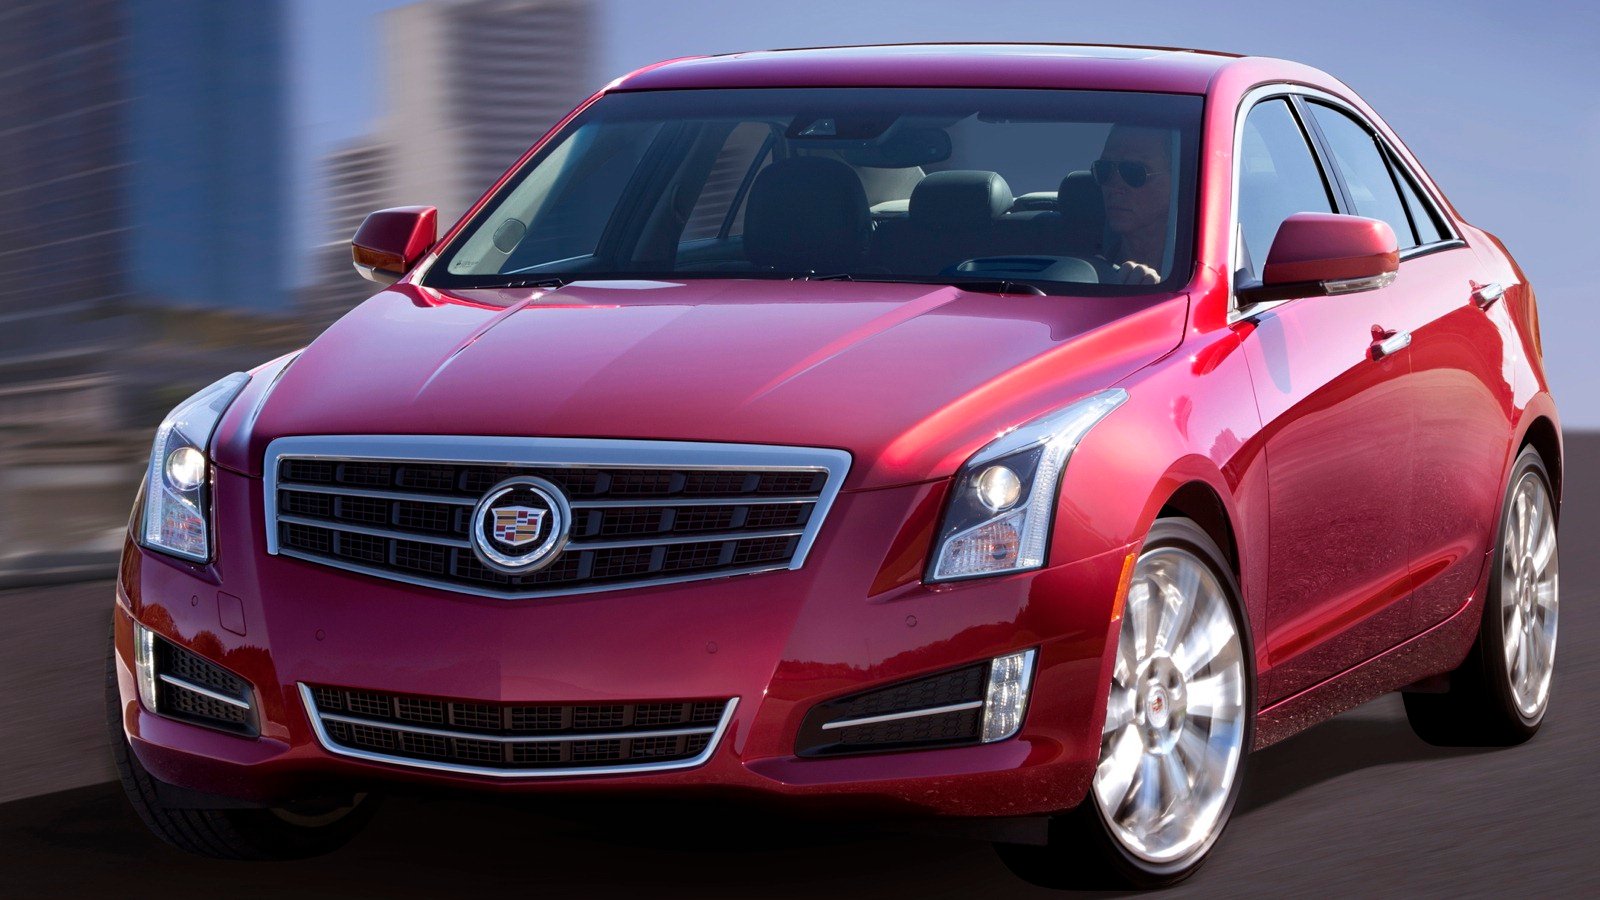 Compare cadillac ats and bmw 3 series #5